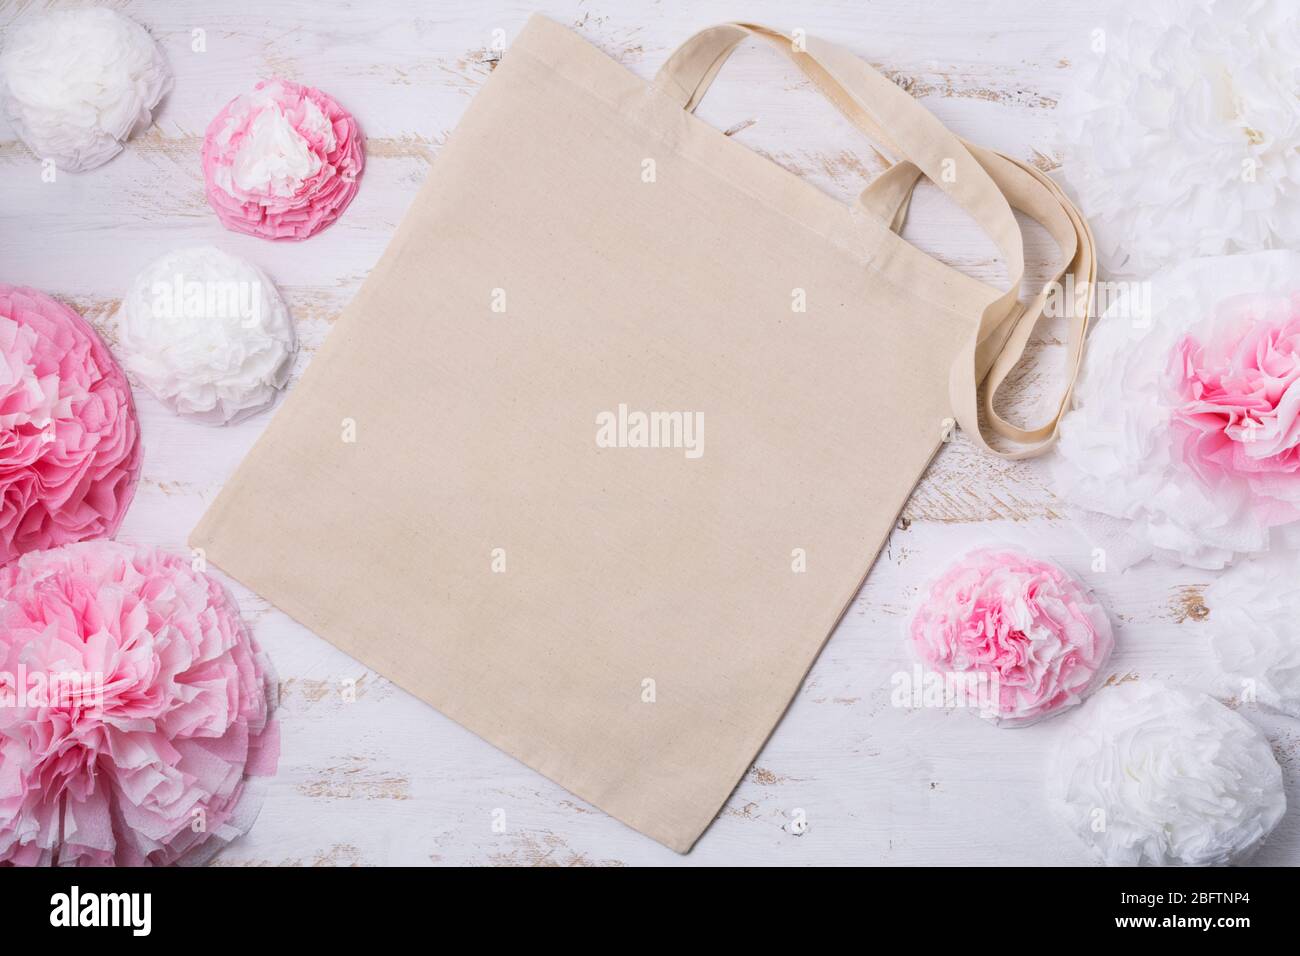 Download Canvas Tote Bag Mockup With White And Pink Paper Flowers Empty Tote Bag Mock Up For Branding Presentation Stock Photo Alamy